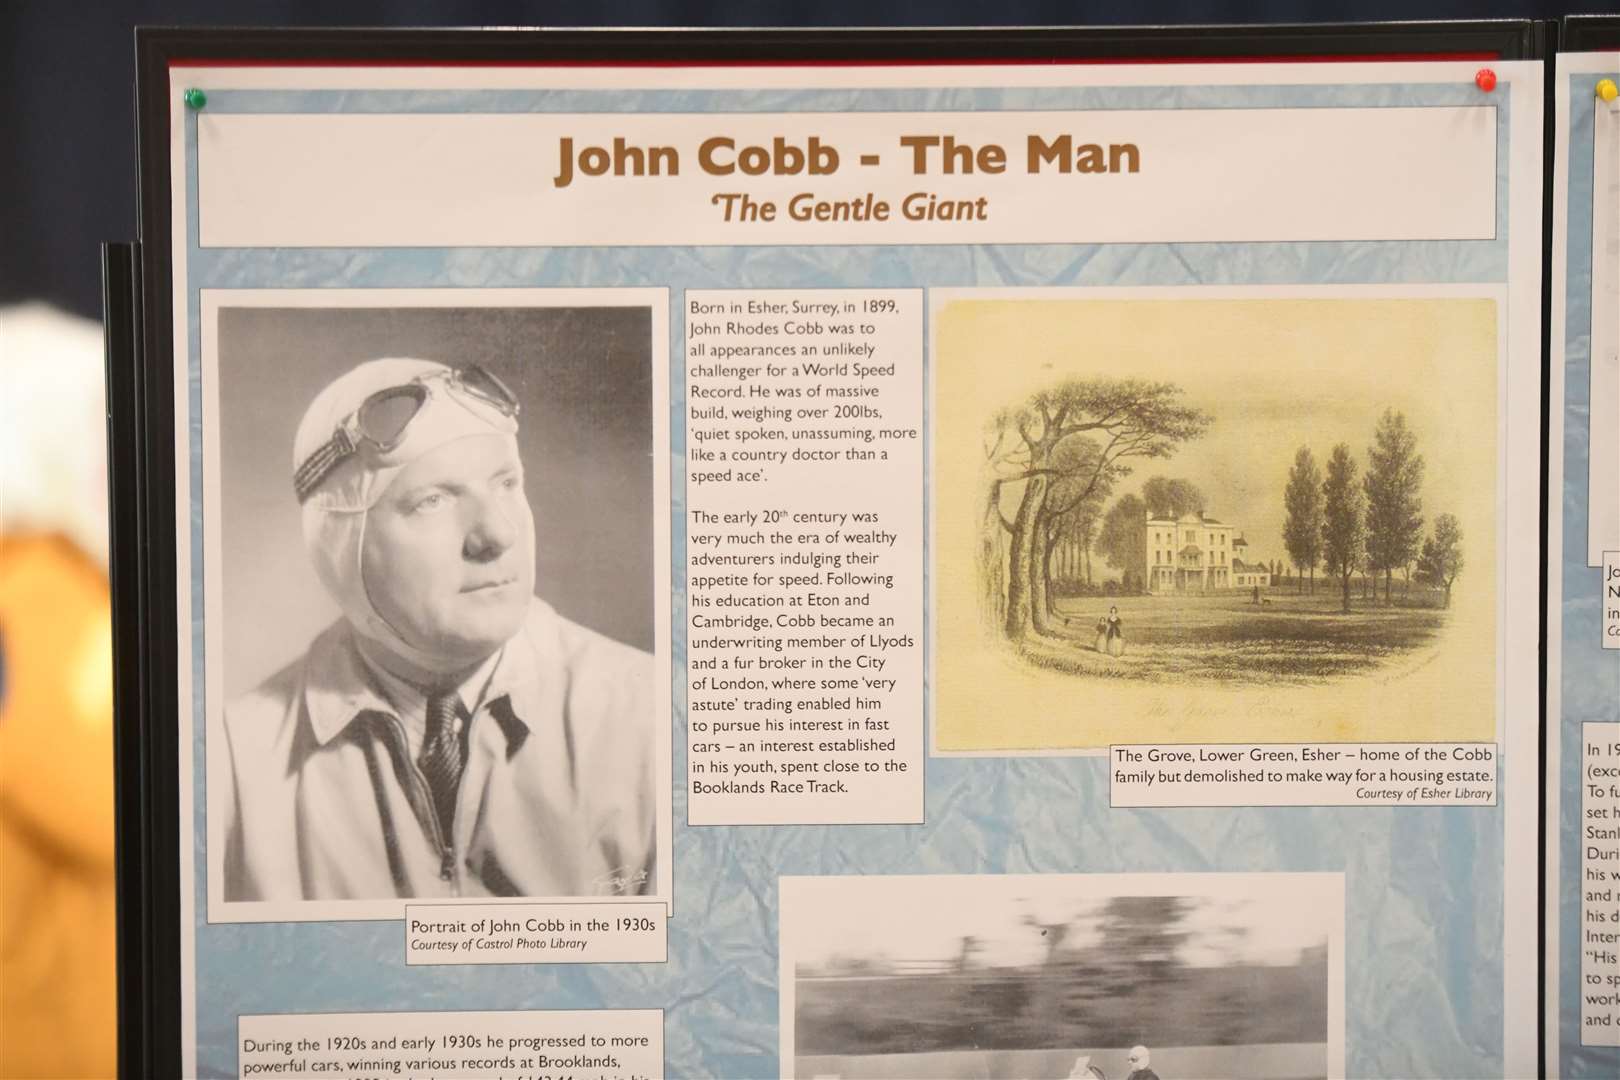 John Cobb, dubbed The Gentle Giant, died 70 years ago during an ill-fated water speed record attempt on Loch Ness.